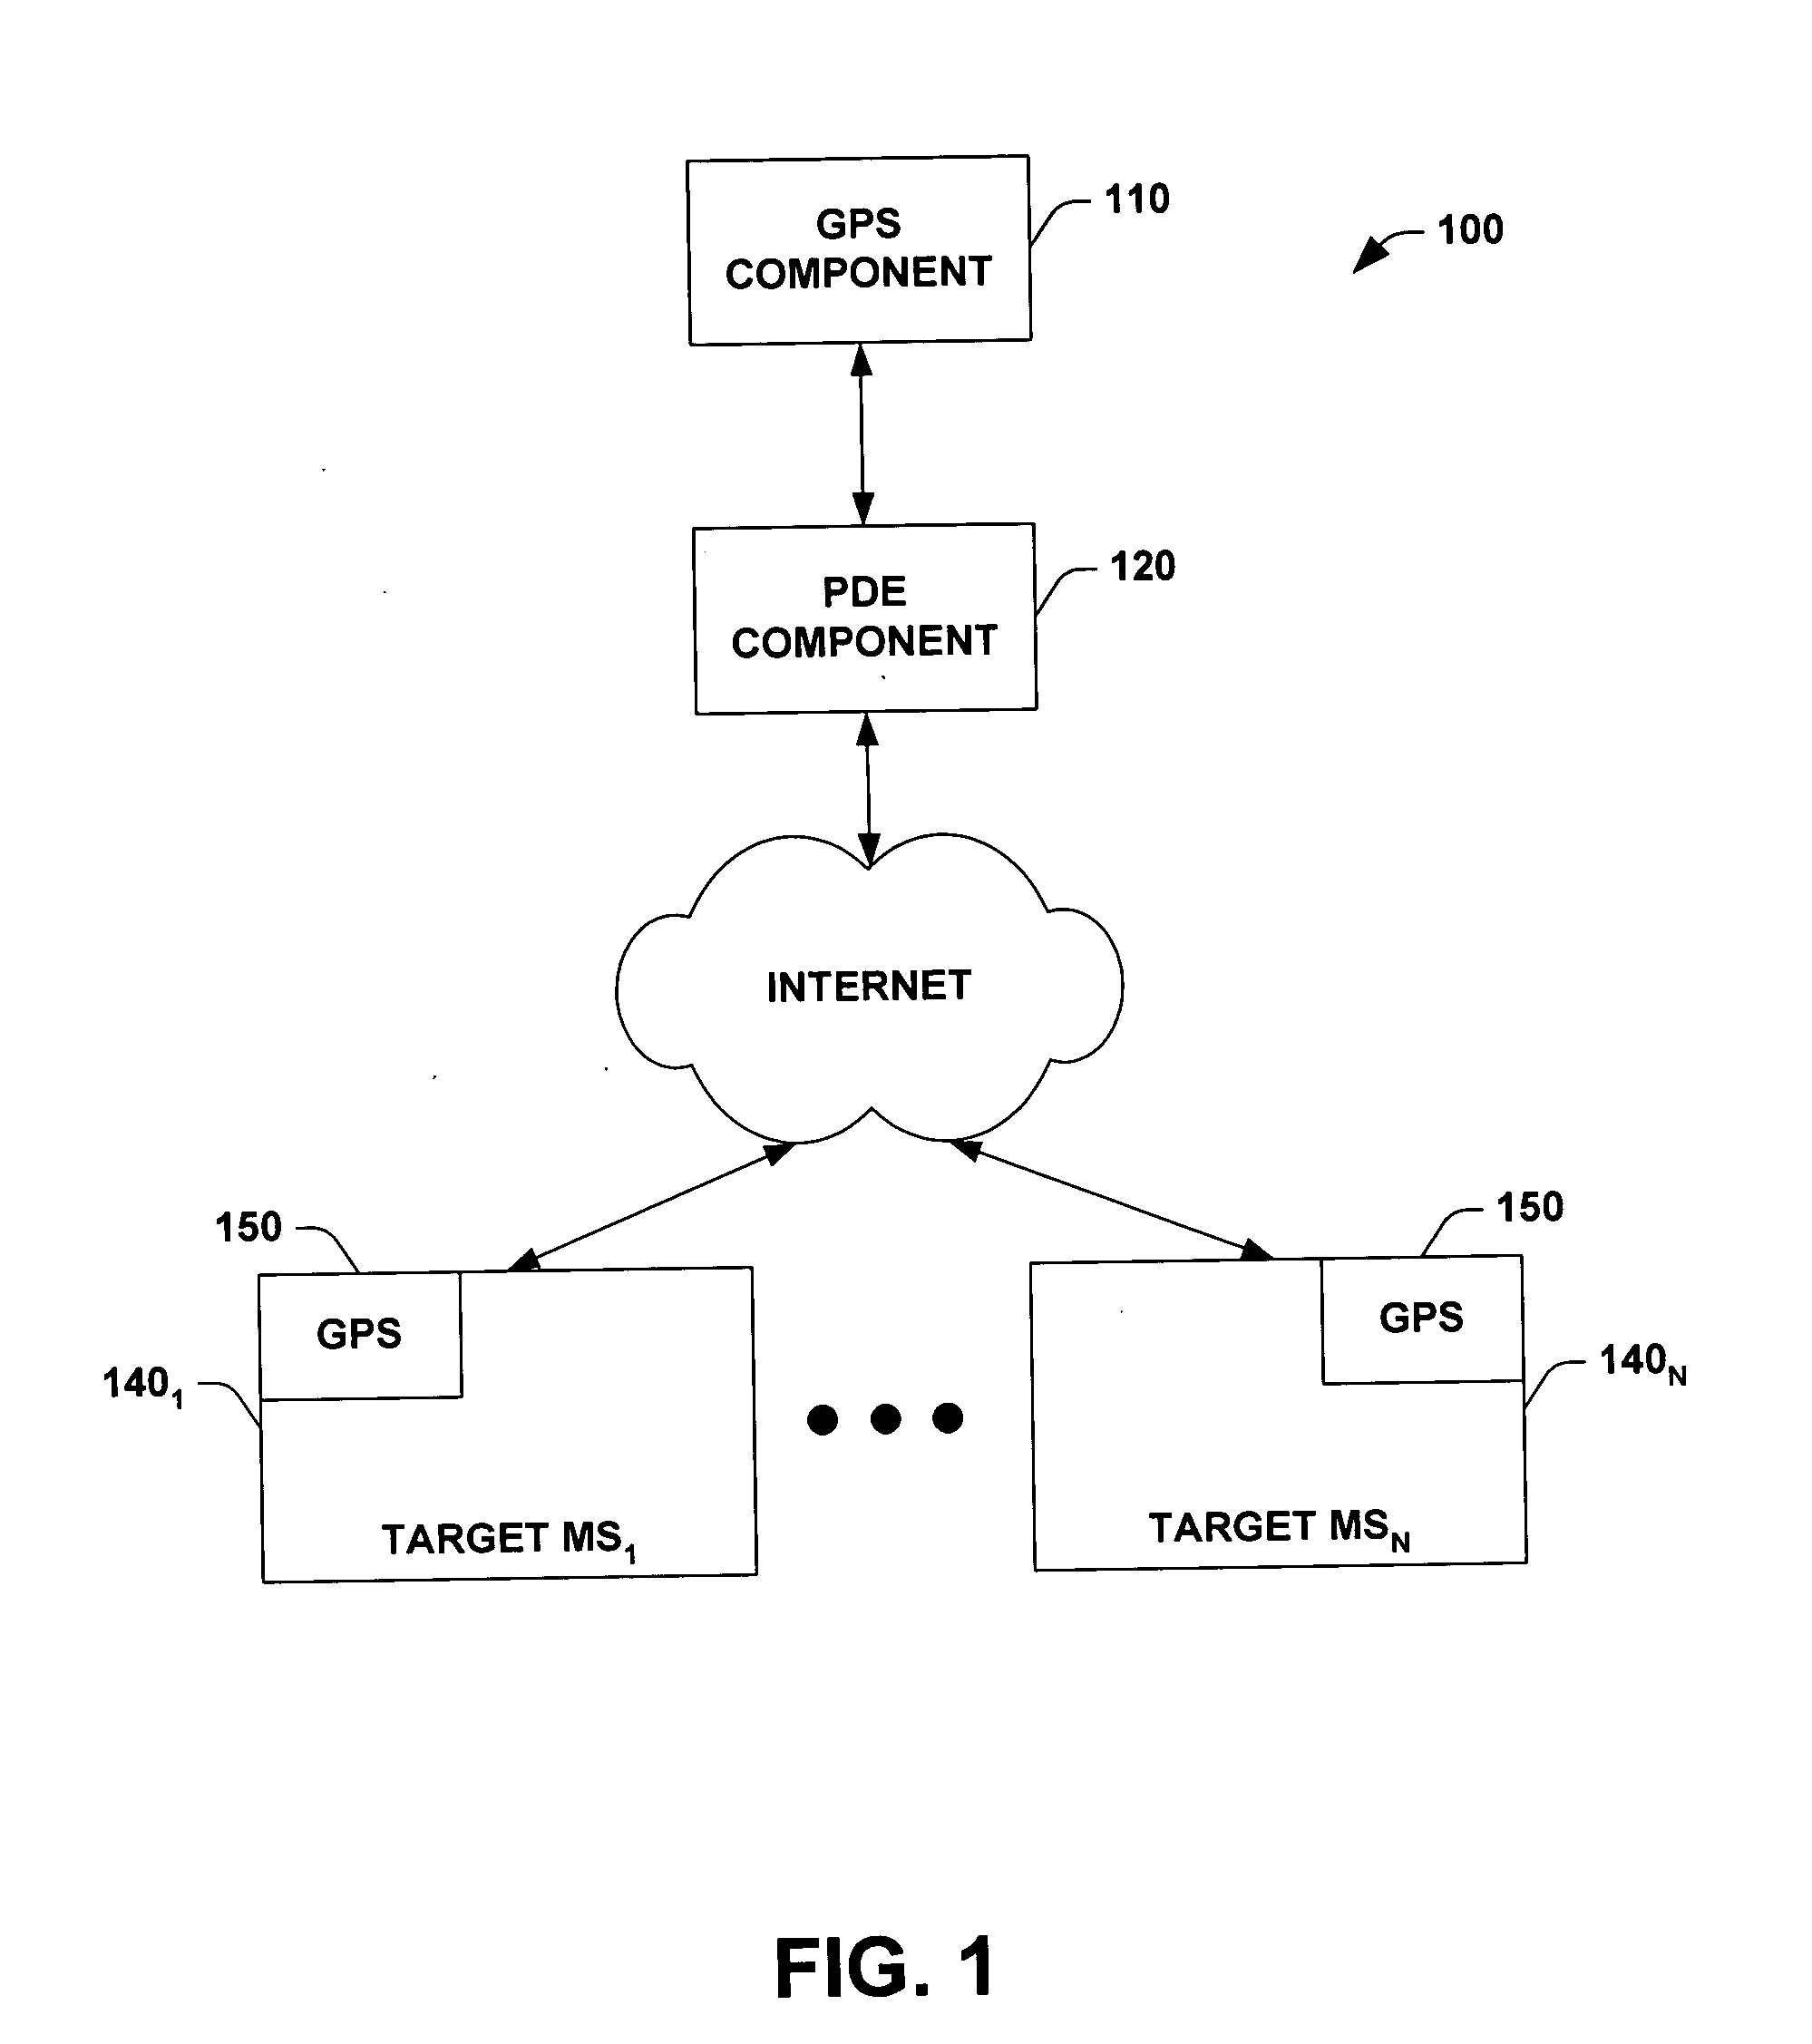 IP-based location service within code division multiple access network